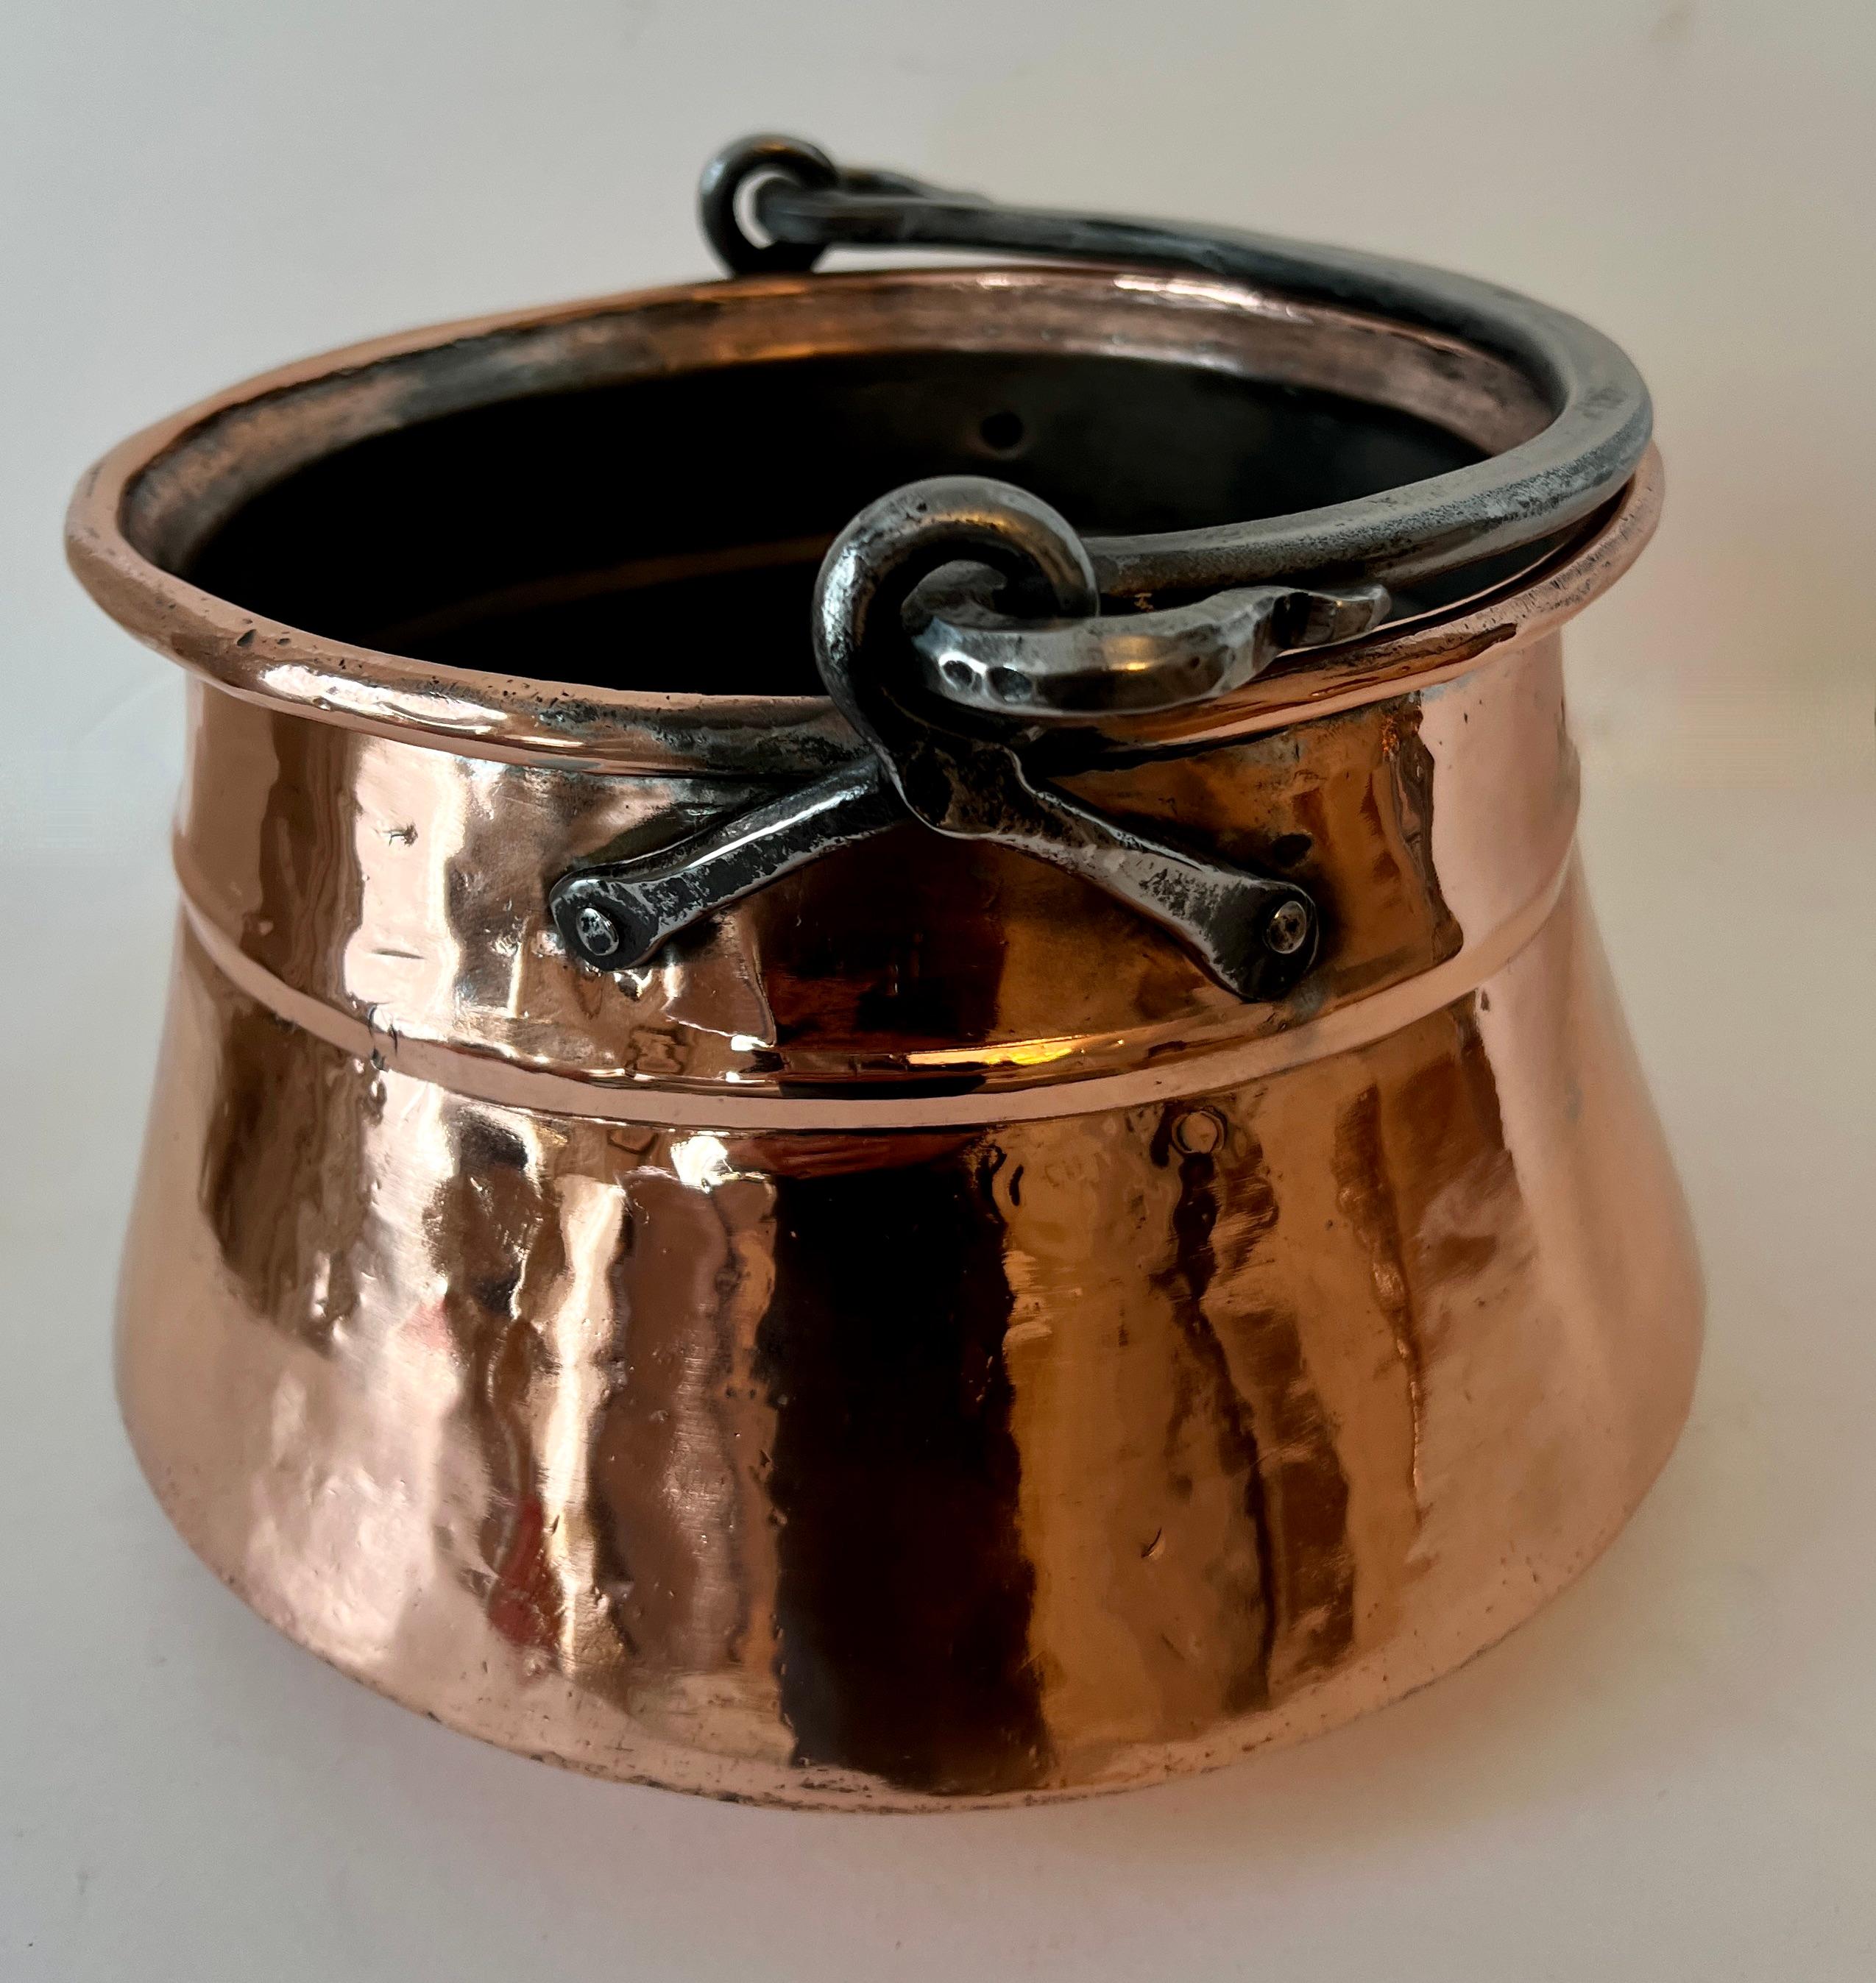 a Wonderful fully operational copper cooking pot from the 19th century, fully restored and polished.  

We love this hanging in a snappy new kitchen for show, or using it to cook soup for your homeless friends.. or you can use this in any room to